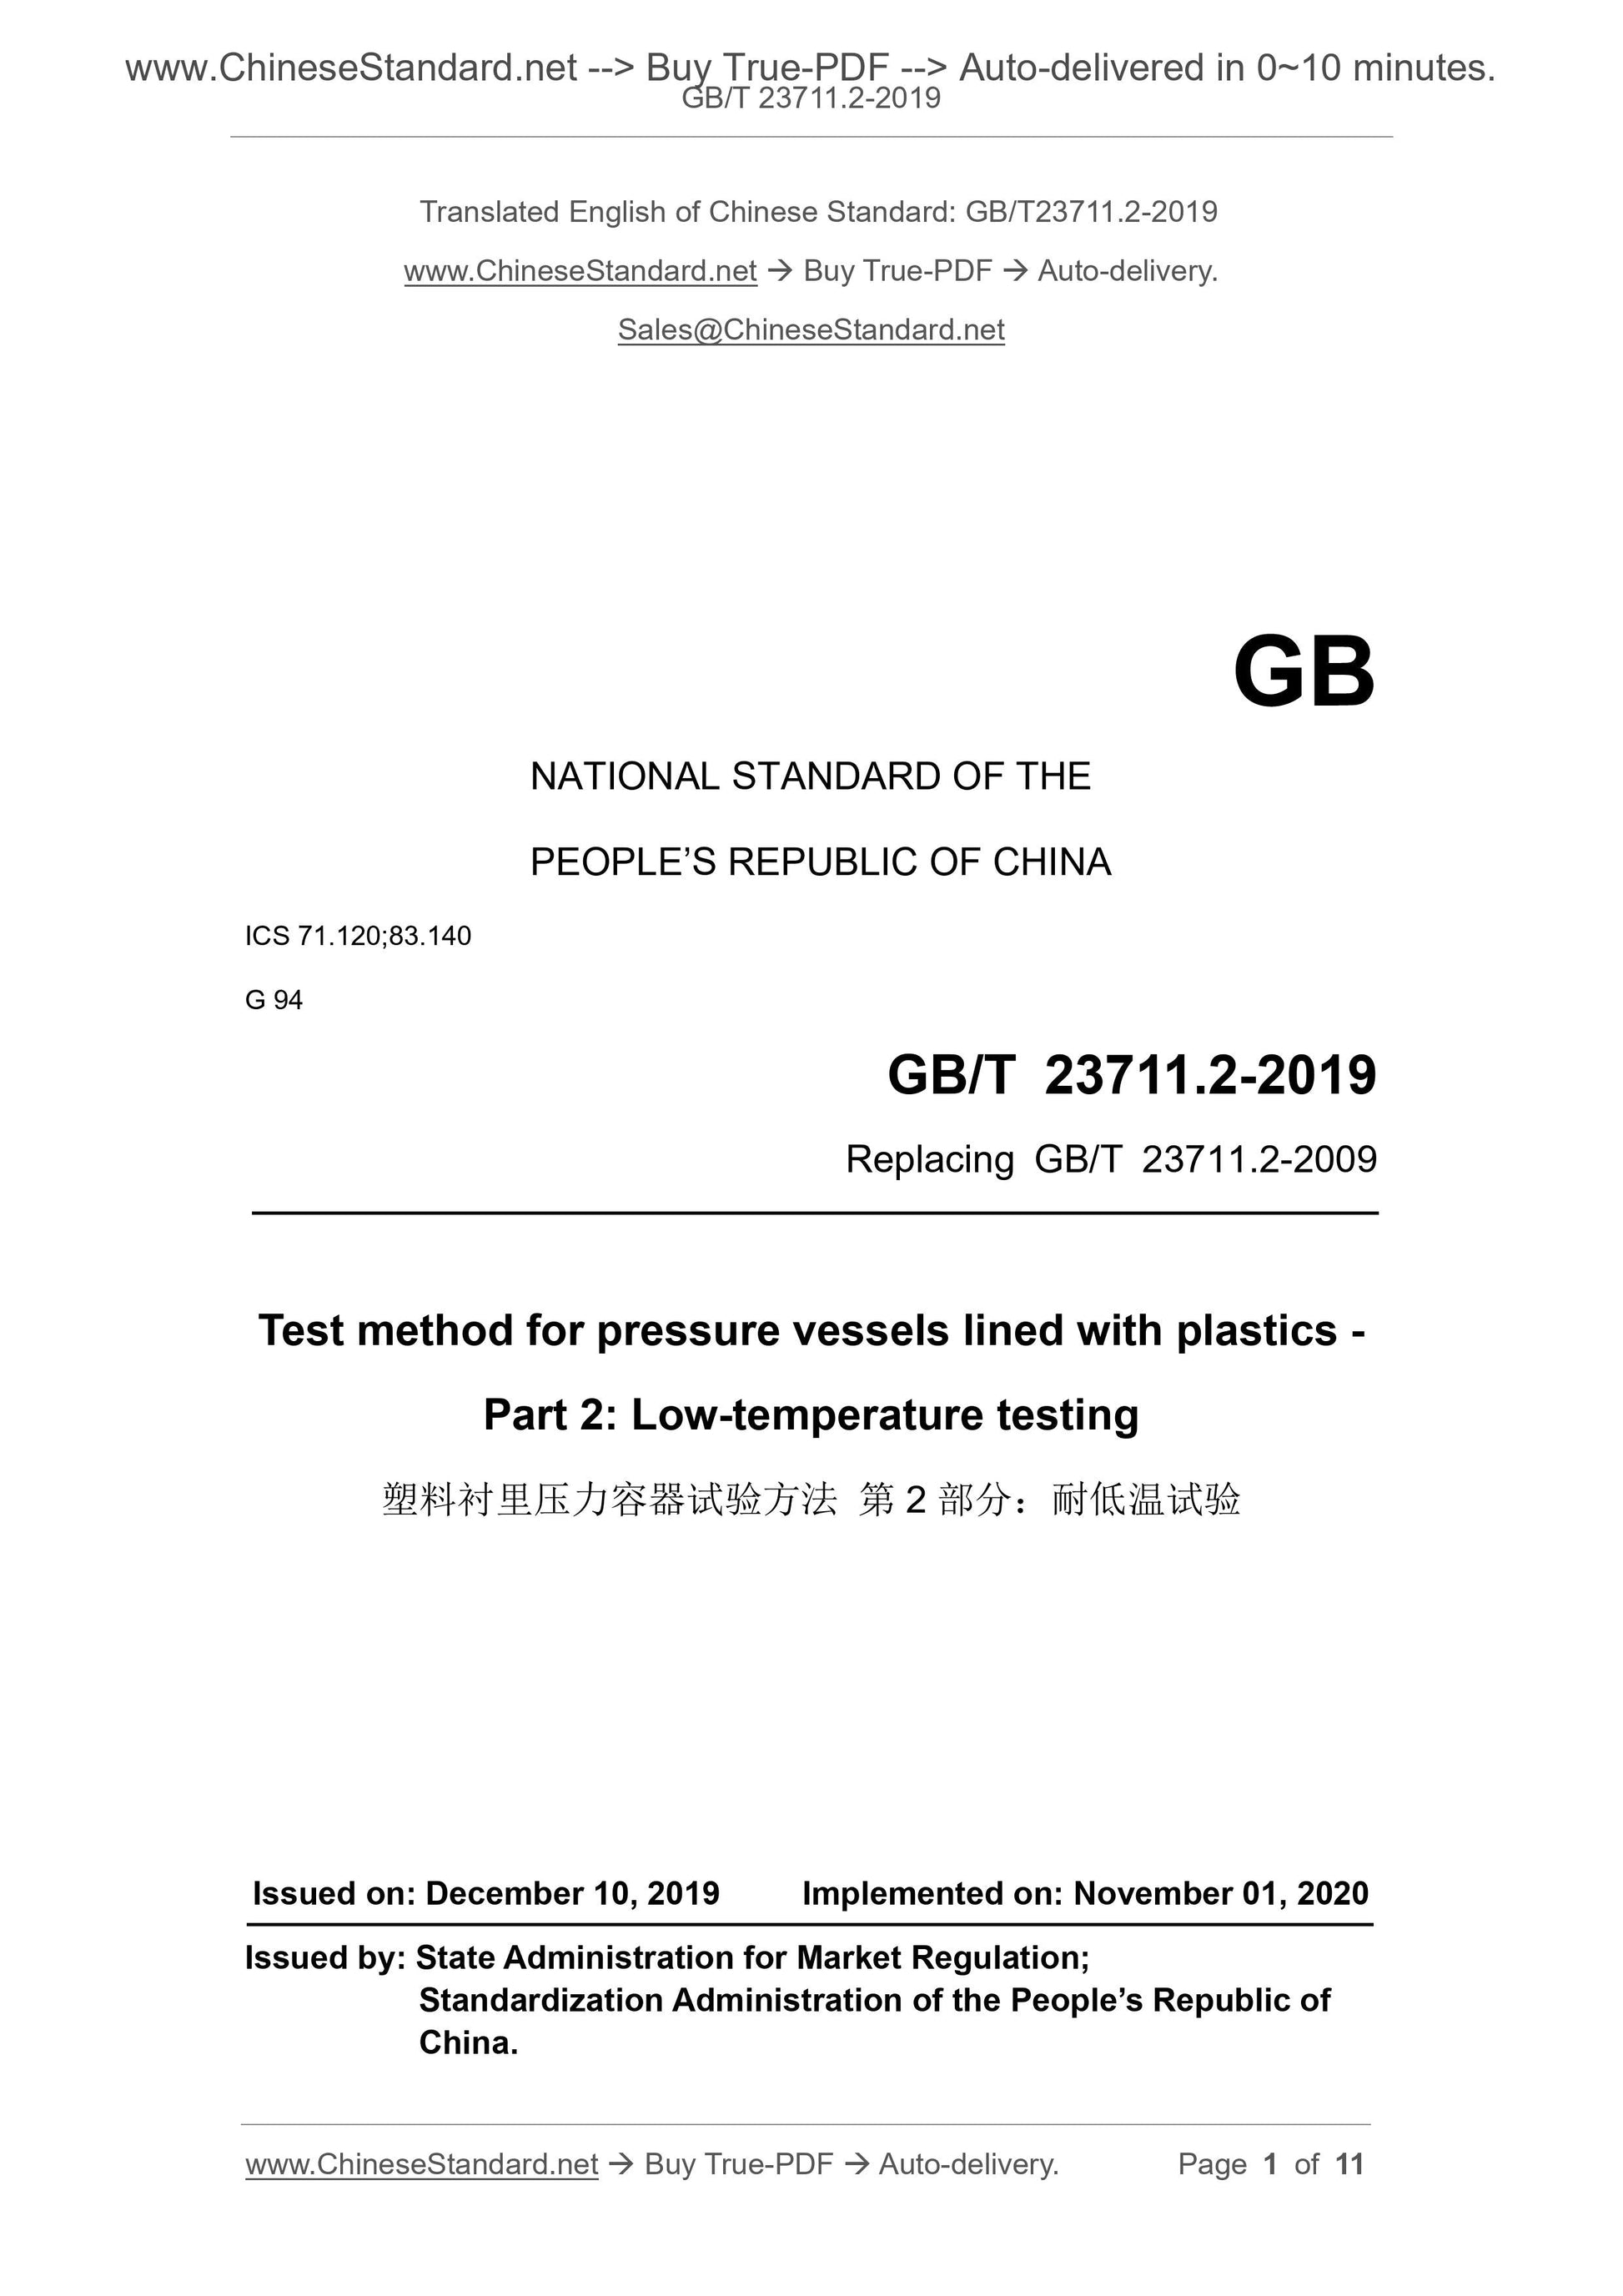 GB/T 23711.2-2019 Page 1